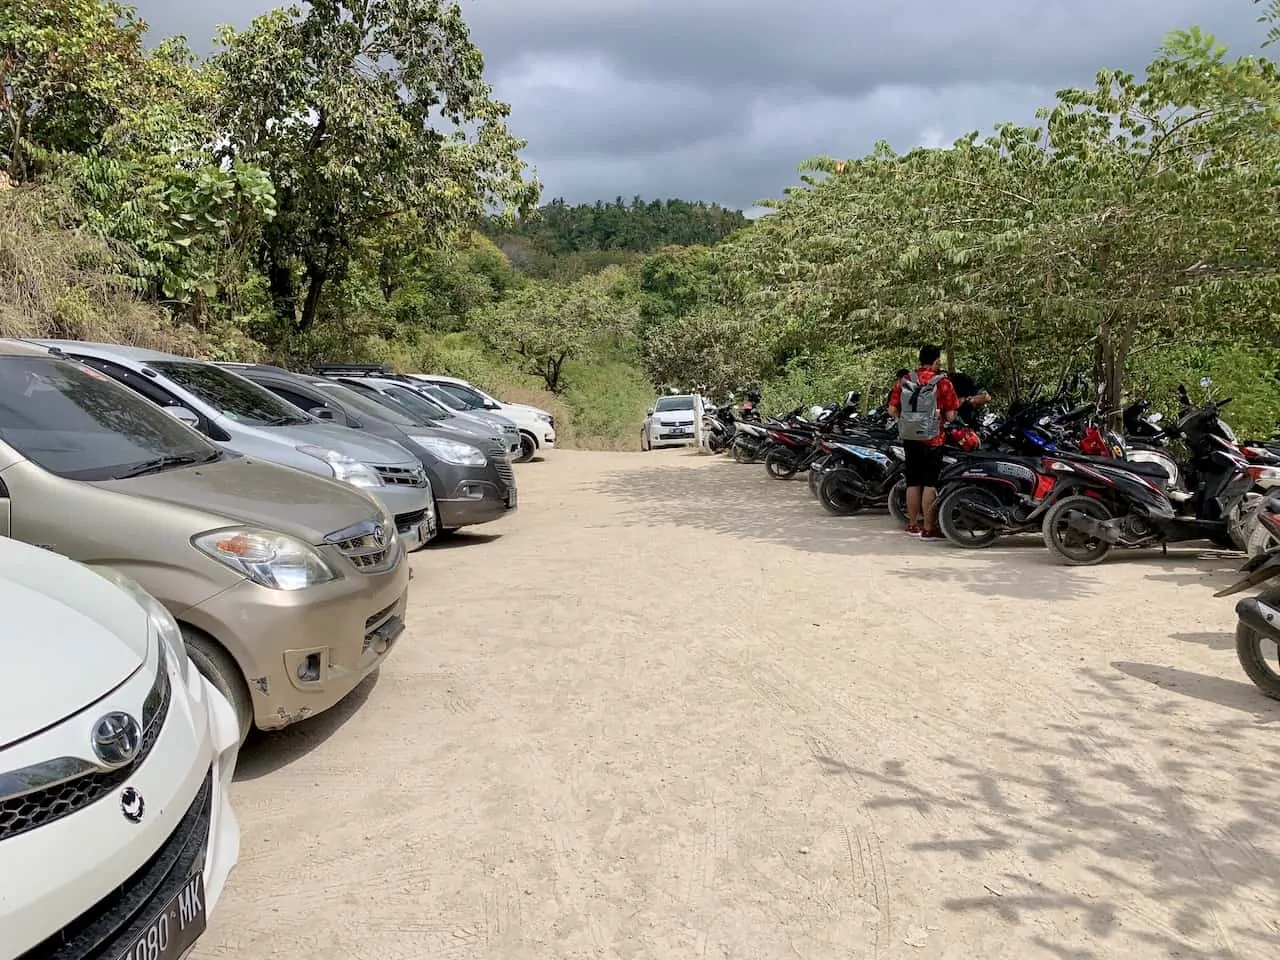 Diamoand and Atuh Beach Parking